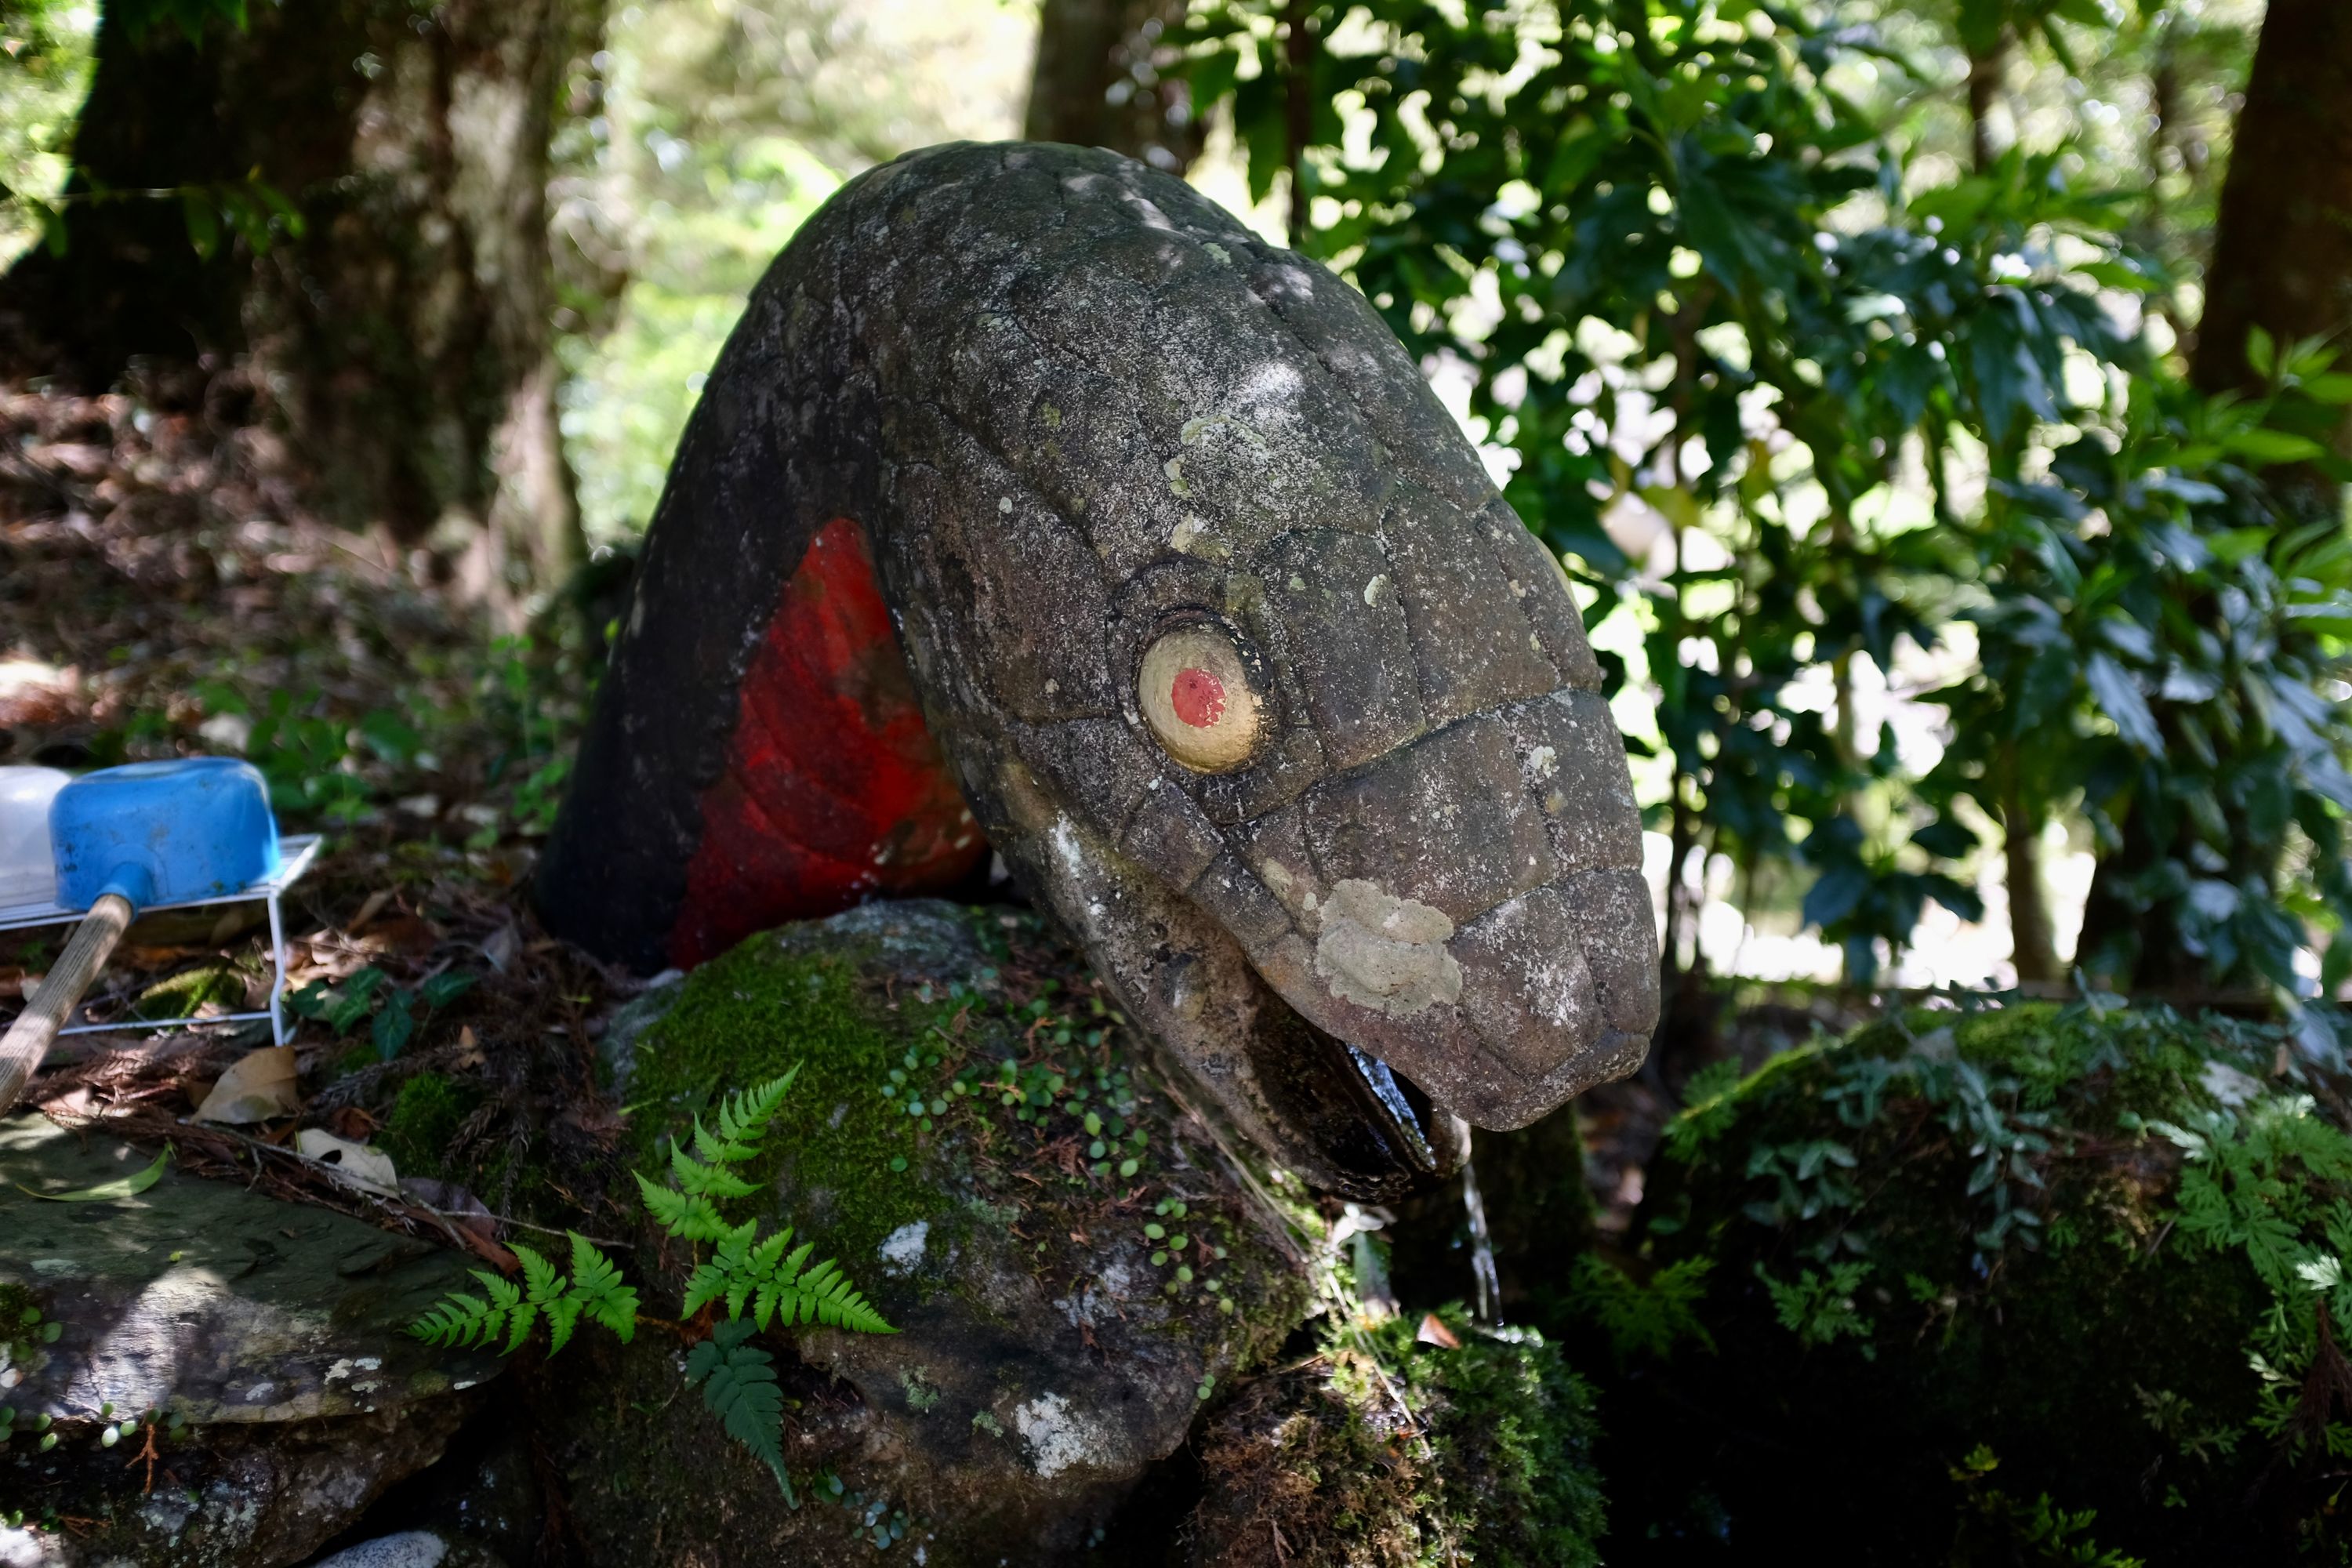 The fountain at the shrine is the head of a large snake, with water pouring from its mouth.